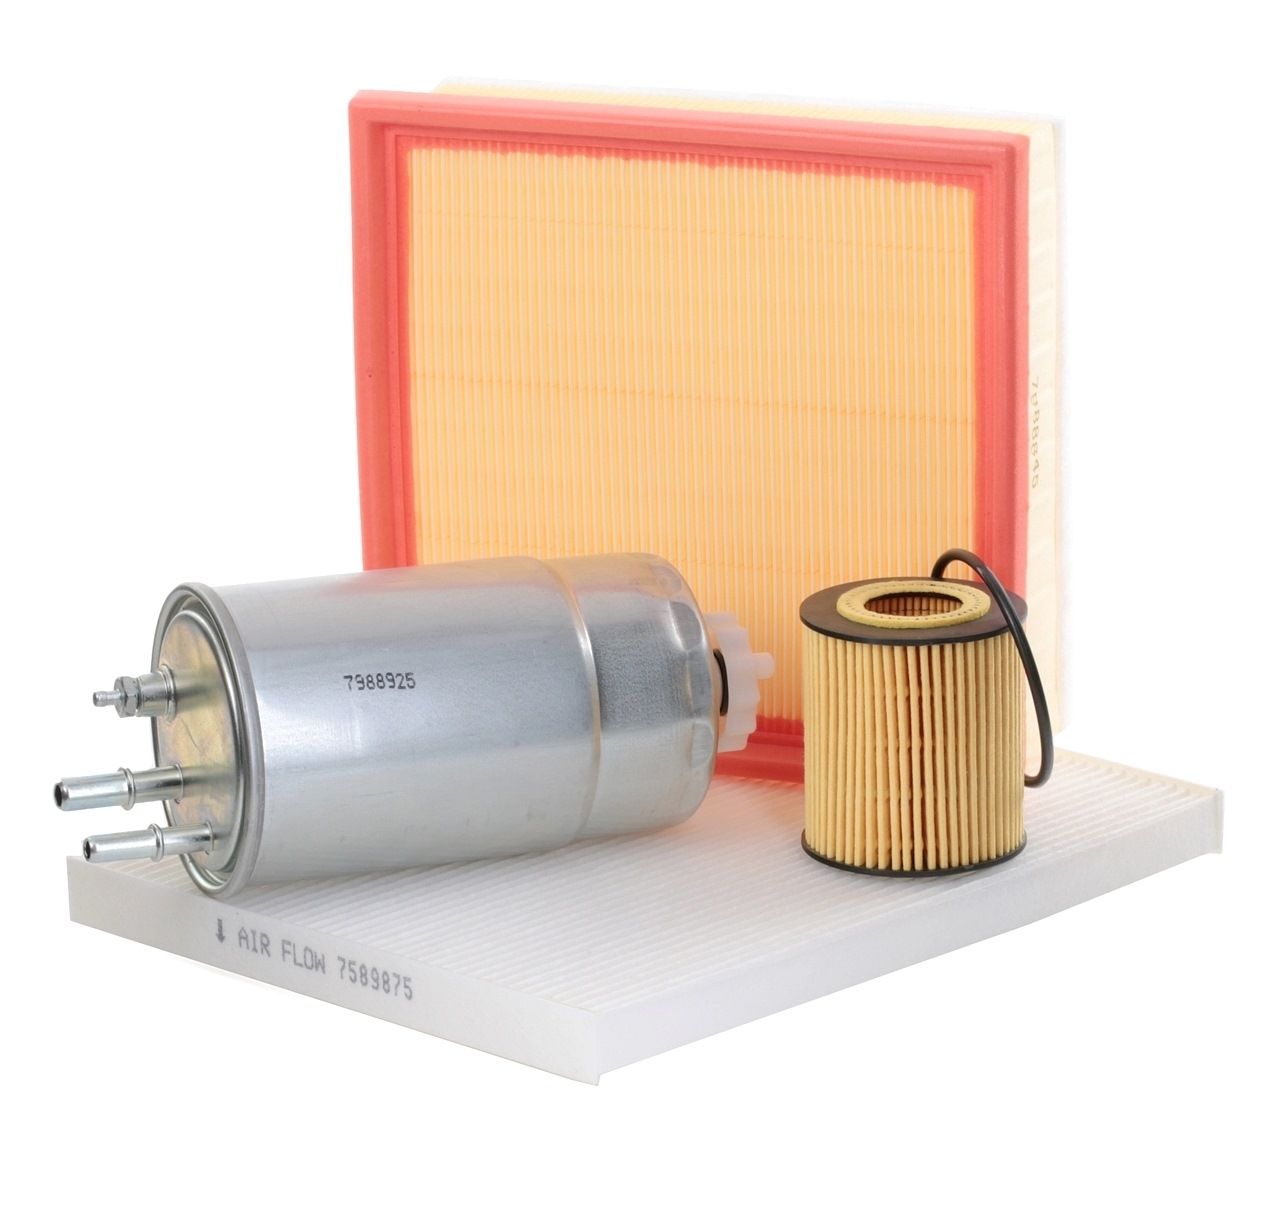 STARK SKFS-1880130 Filter kit without oil drain plug, with pre-filter, Filter Insert, In-Line Filter, Particulate Filter